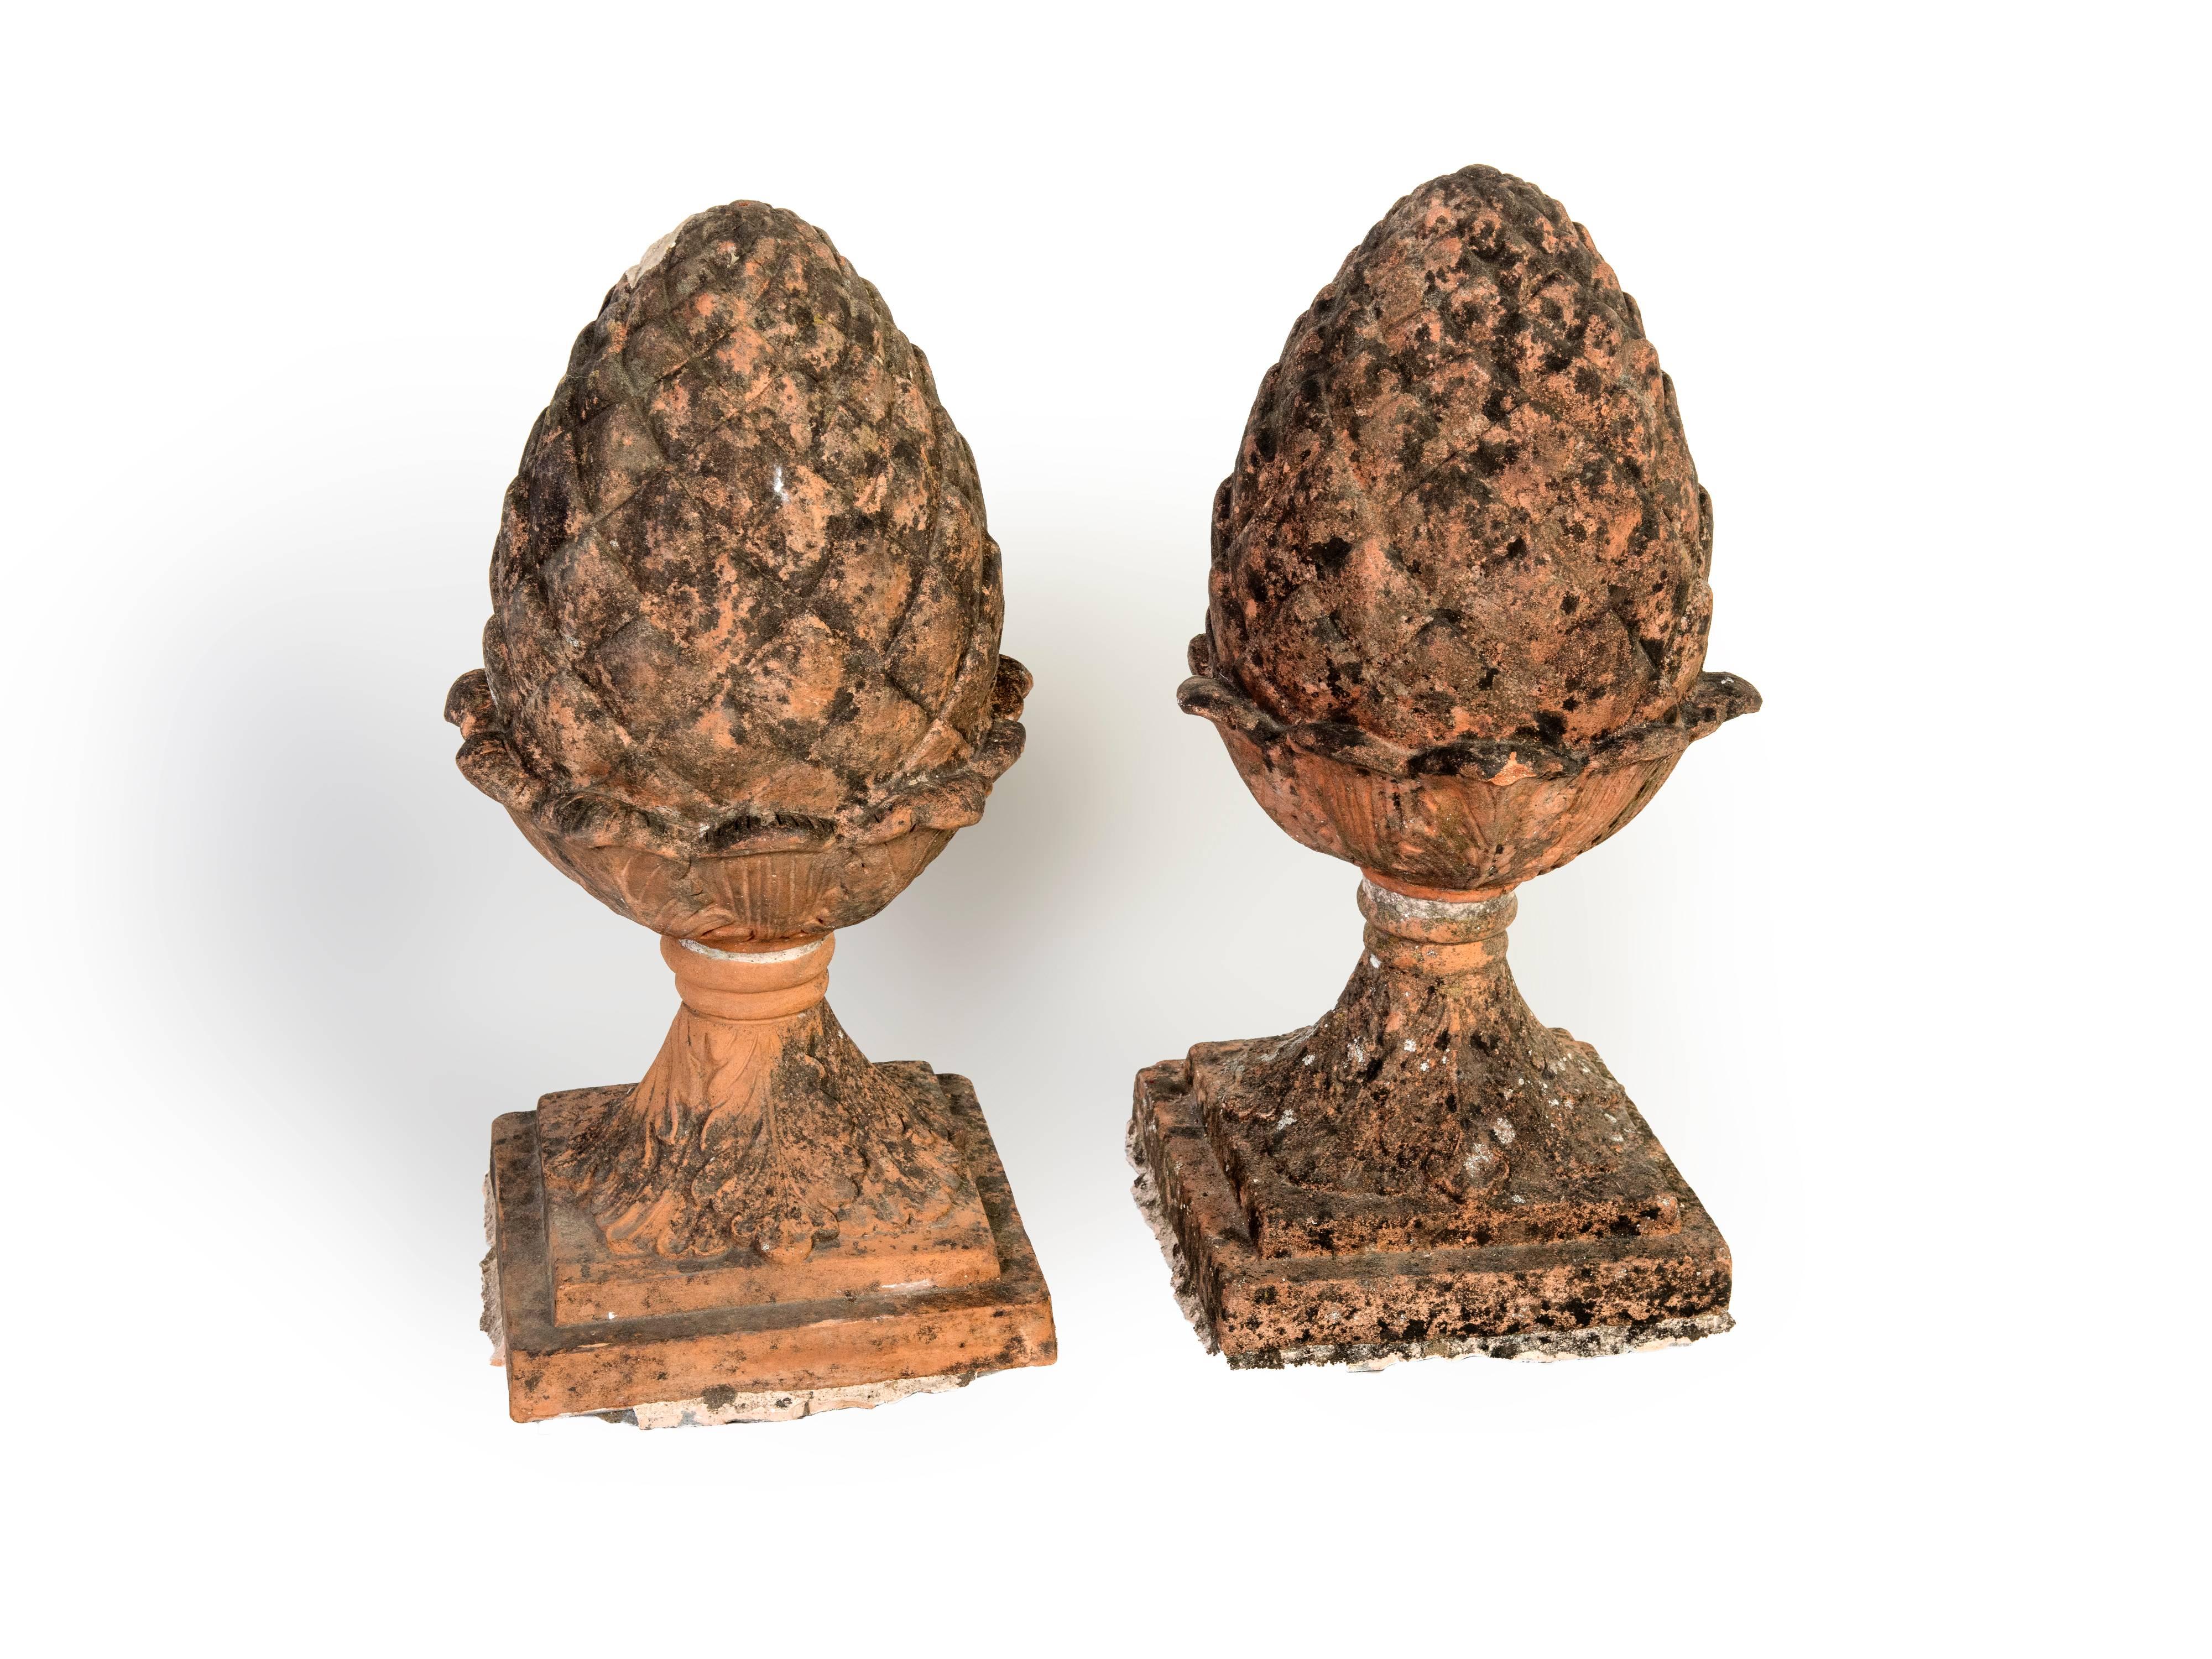 A pair of red terra cotta pineapple garden finials. The patina on these is quite spectacular.